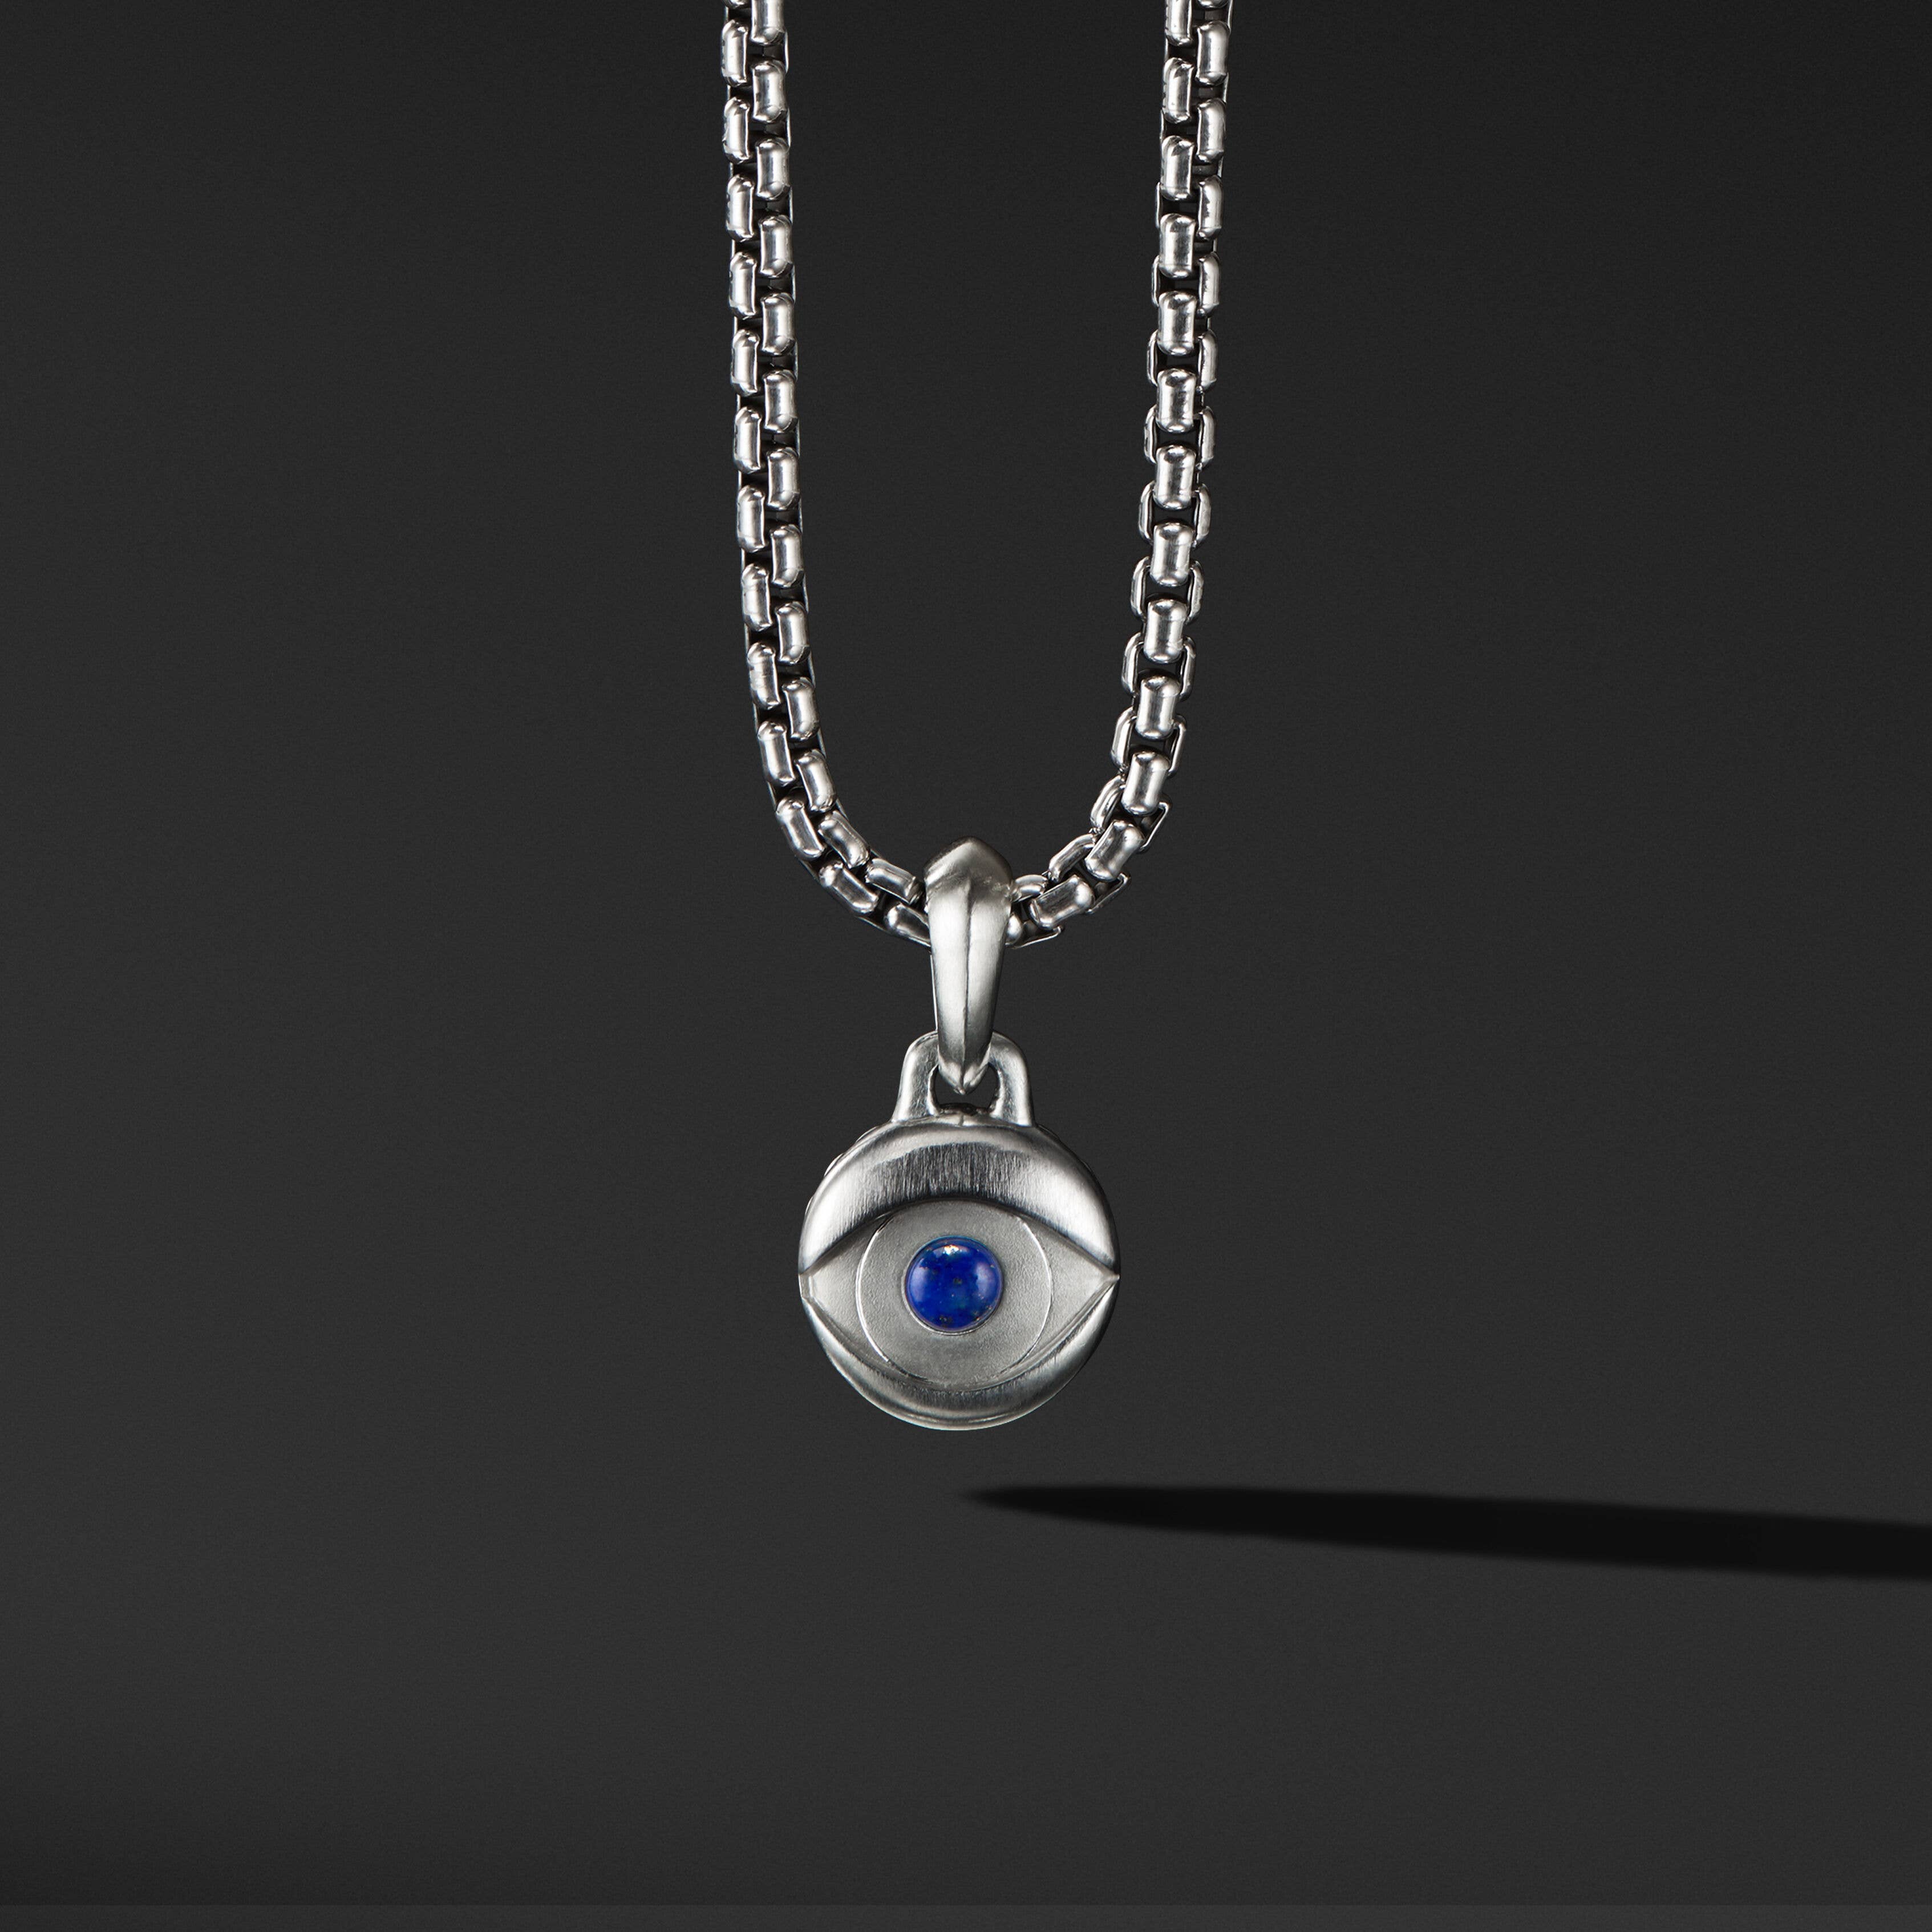 Evil Eye Amulet in Sterling Silver with Lapis